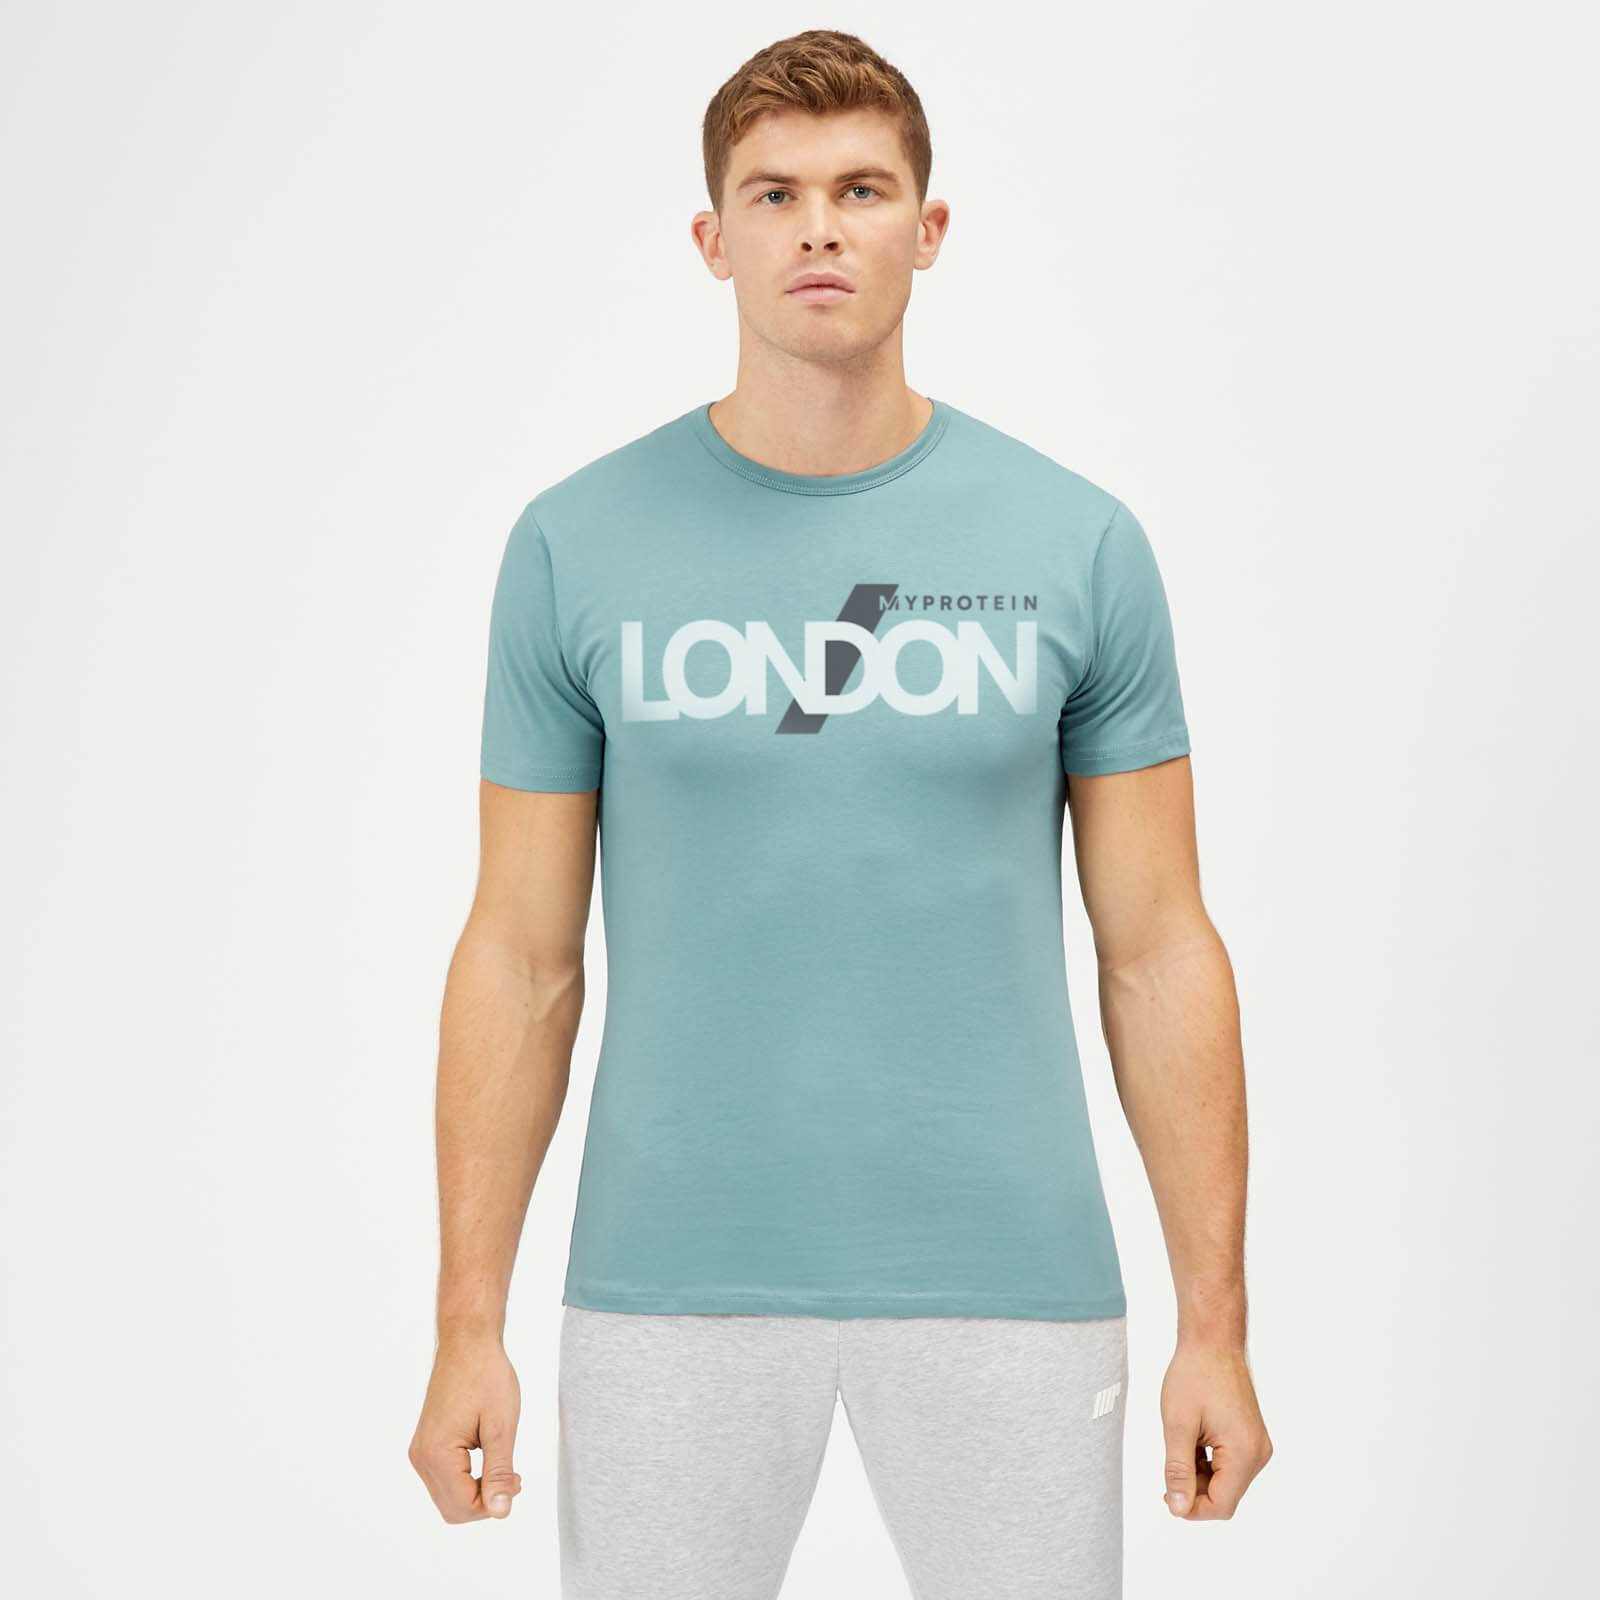 London Limited Edition T-Shirt